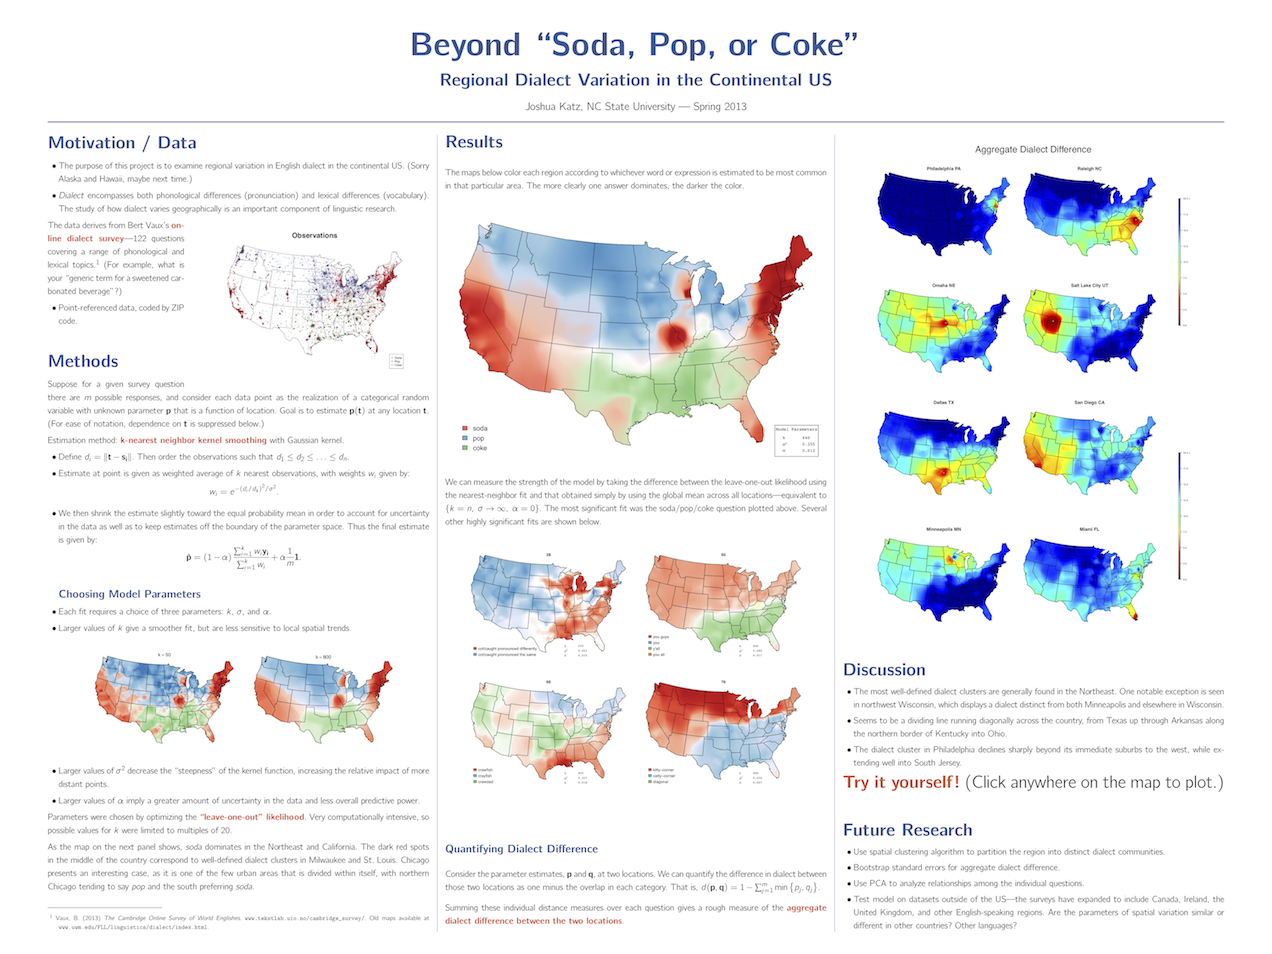 Poster for Dialect Survey Results, by Joshua Katz, NC State University (2013)